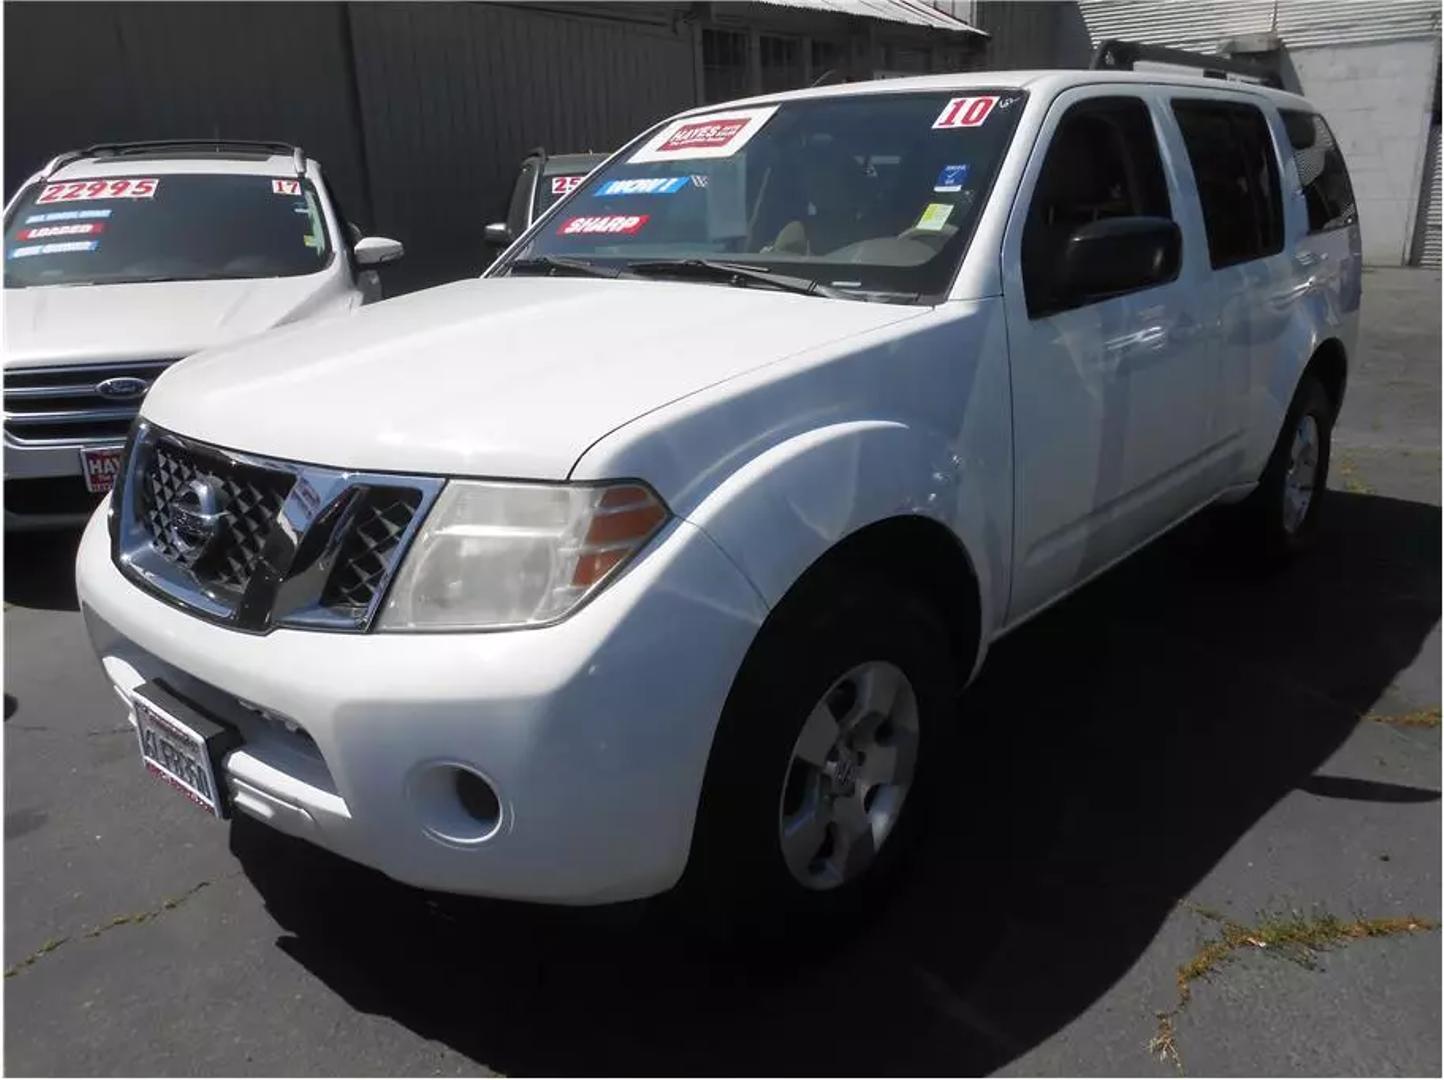 Used 2010 Nissan Pathfinder SE with VIN 5N1AR1NN8AC603567 for sale in Roseville, CA